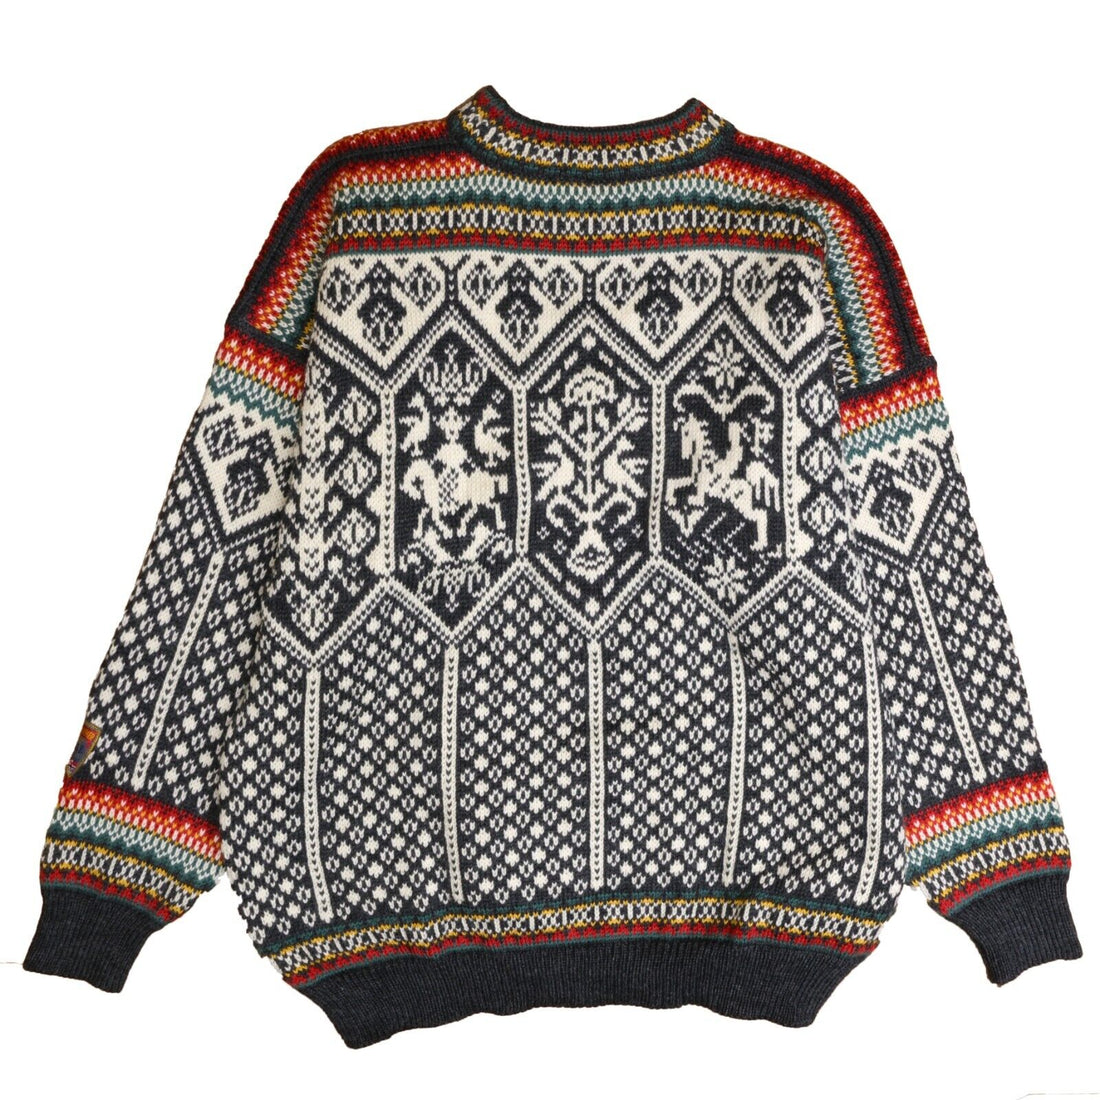 Vintage Dale of Norway Lillehammer Wool Knit Sweater Size 2XL Fair Isle